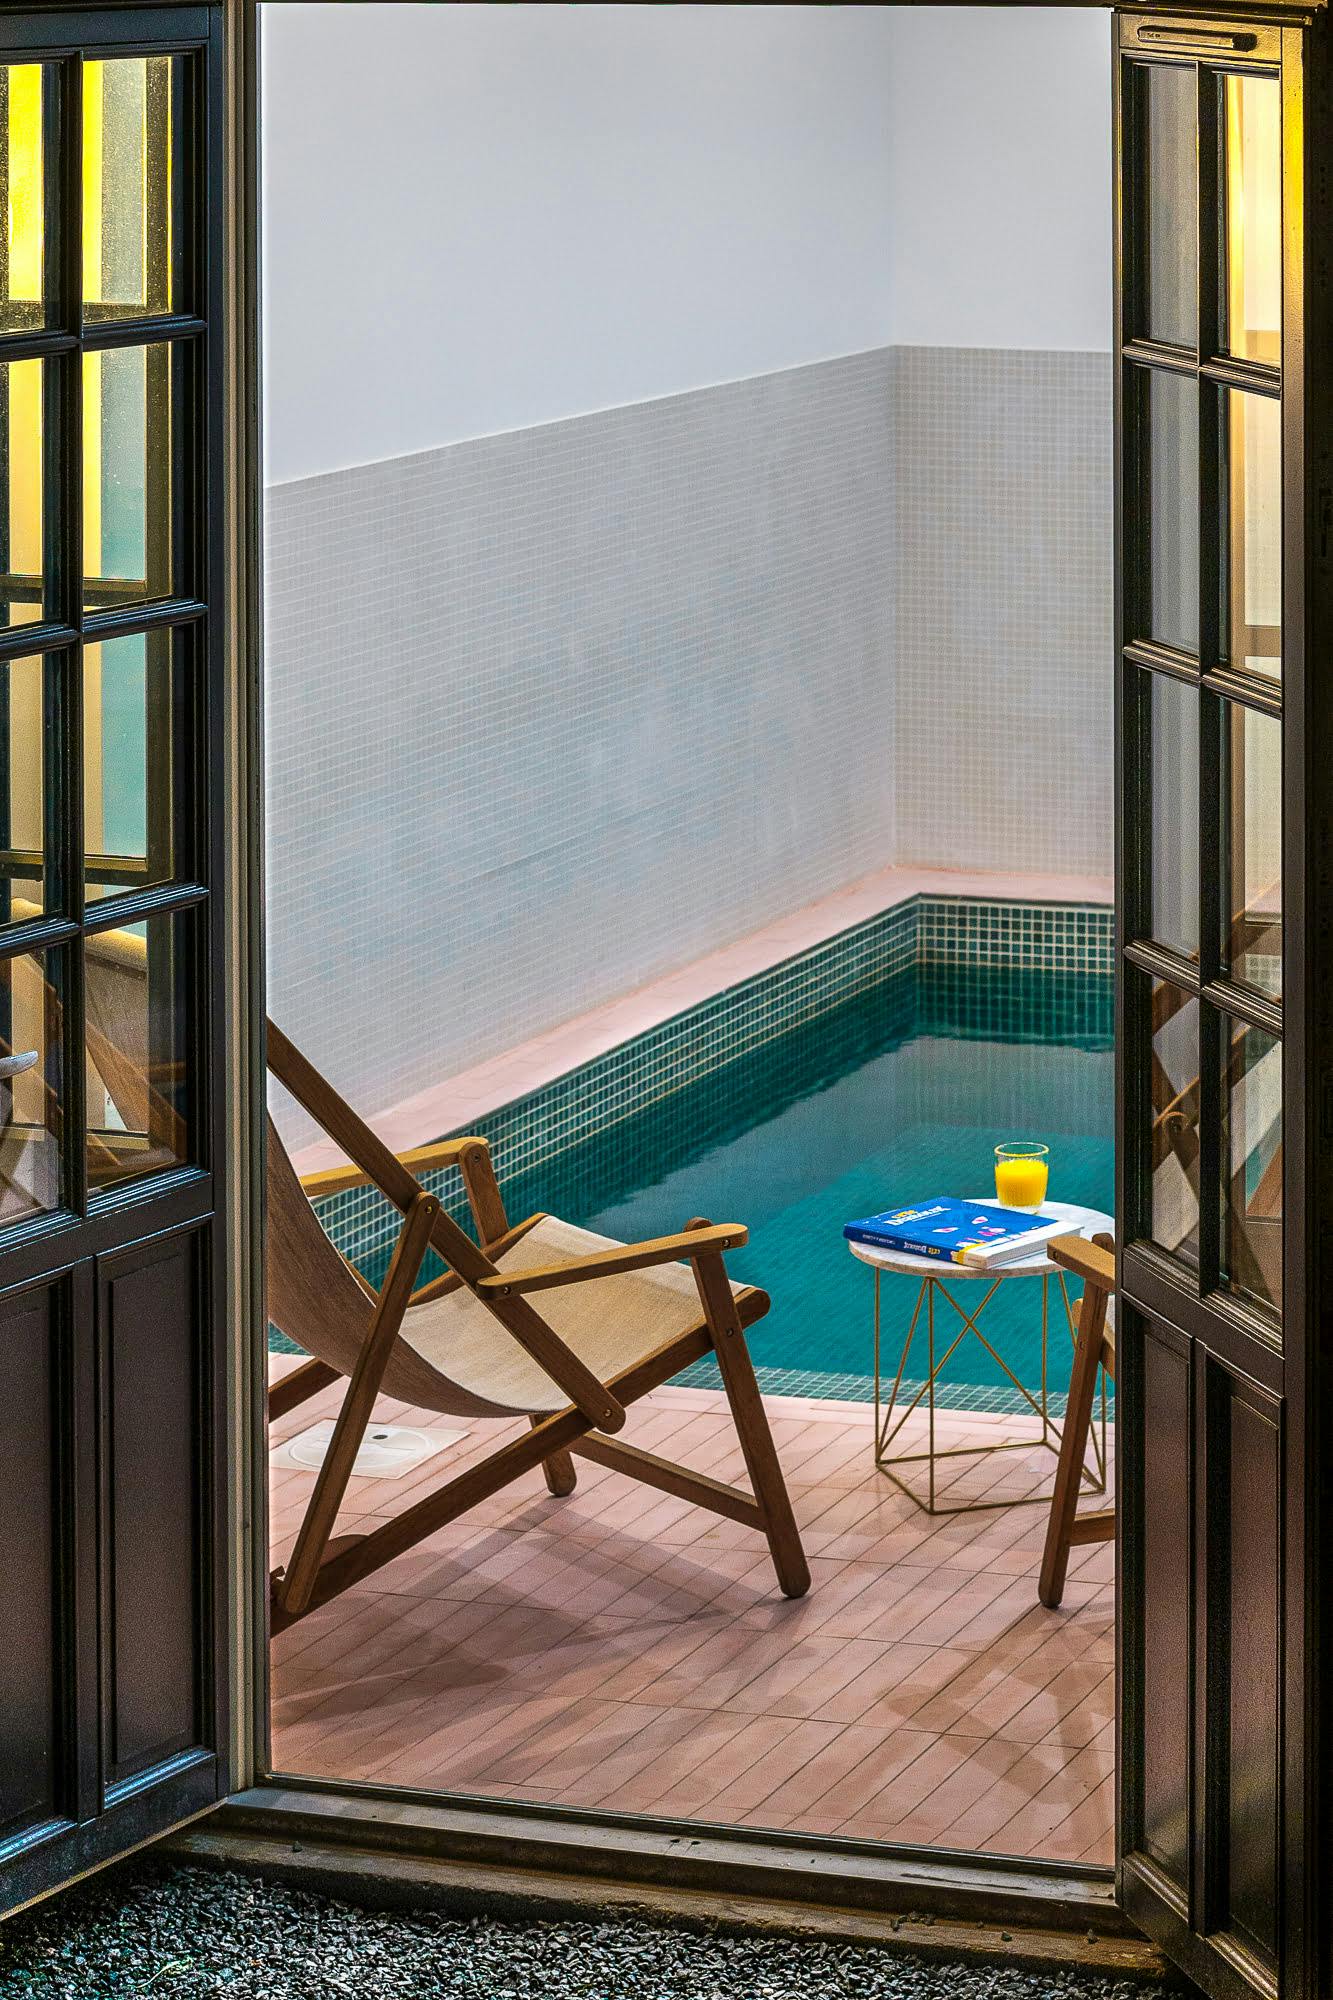 window overlooking the pool and deckchairs